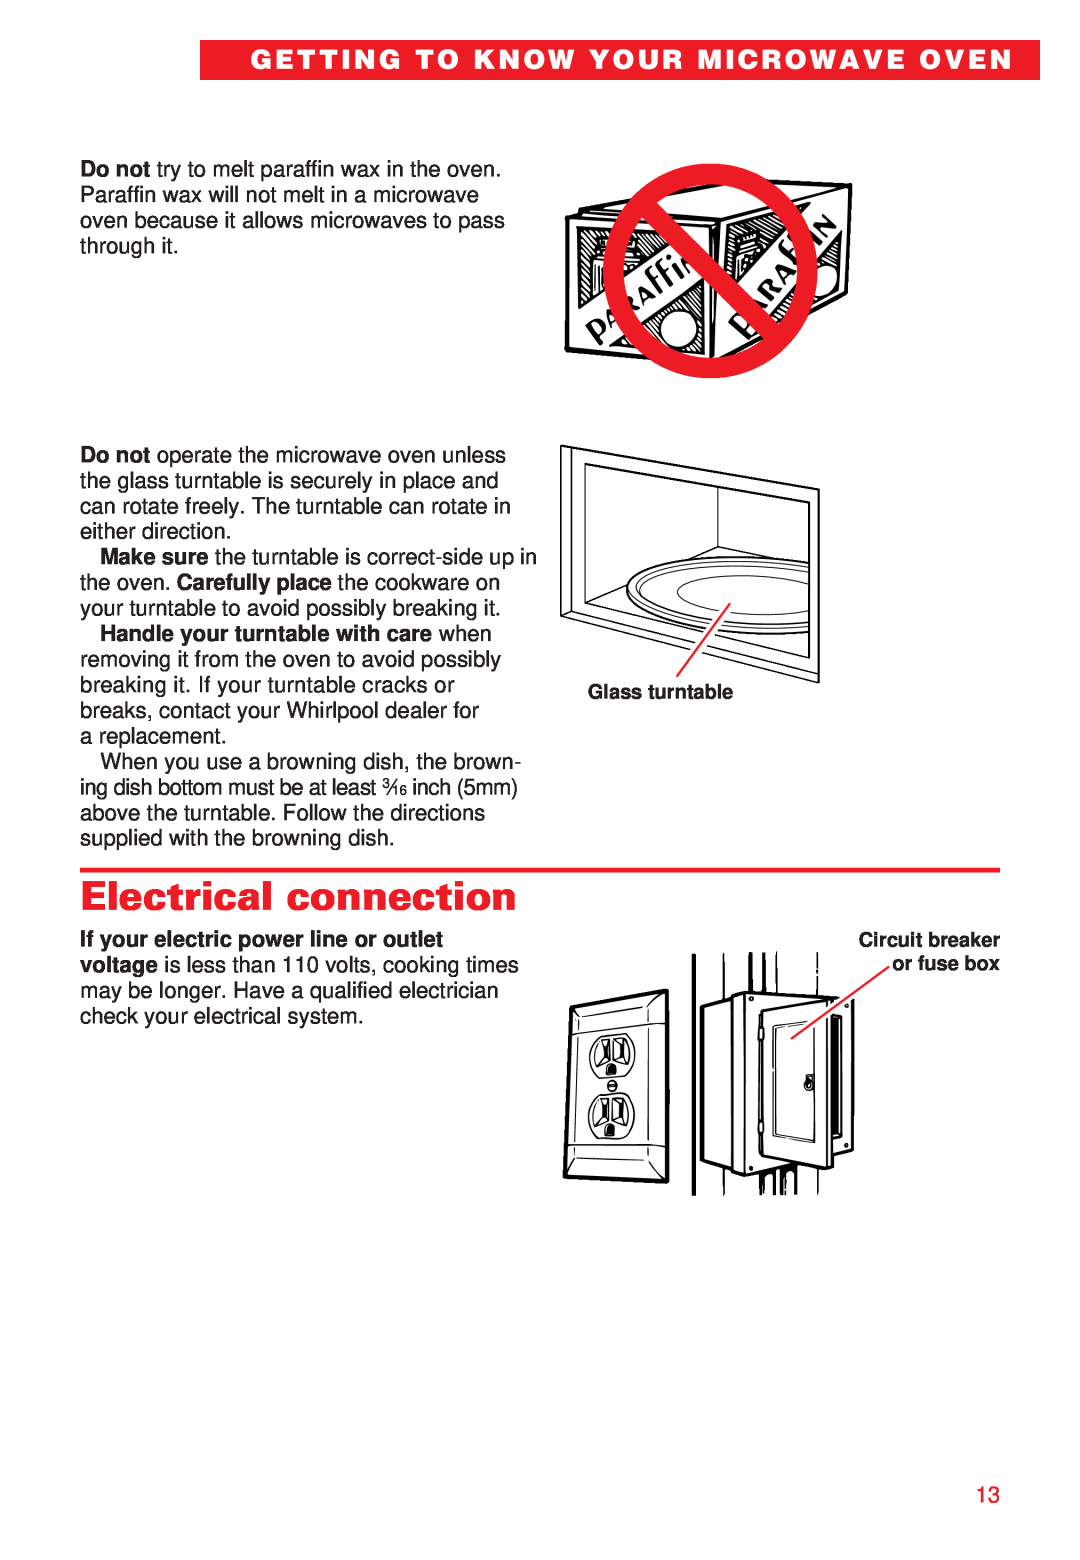 Whirlpool YMT8066SE, YMT8068SE installation instructions Electrical connection, Getting To Know Your Microwave Oven 